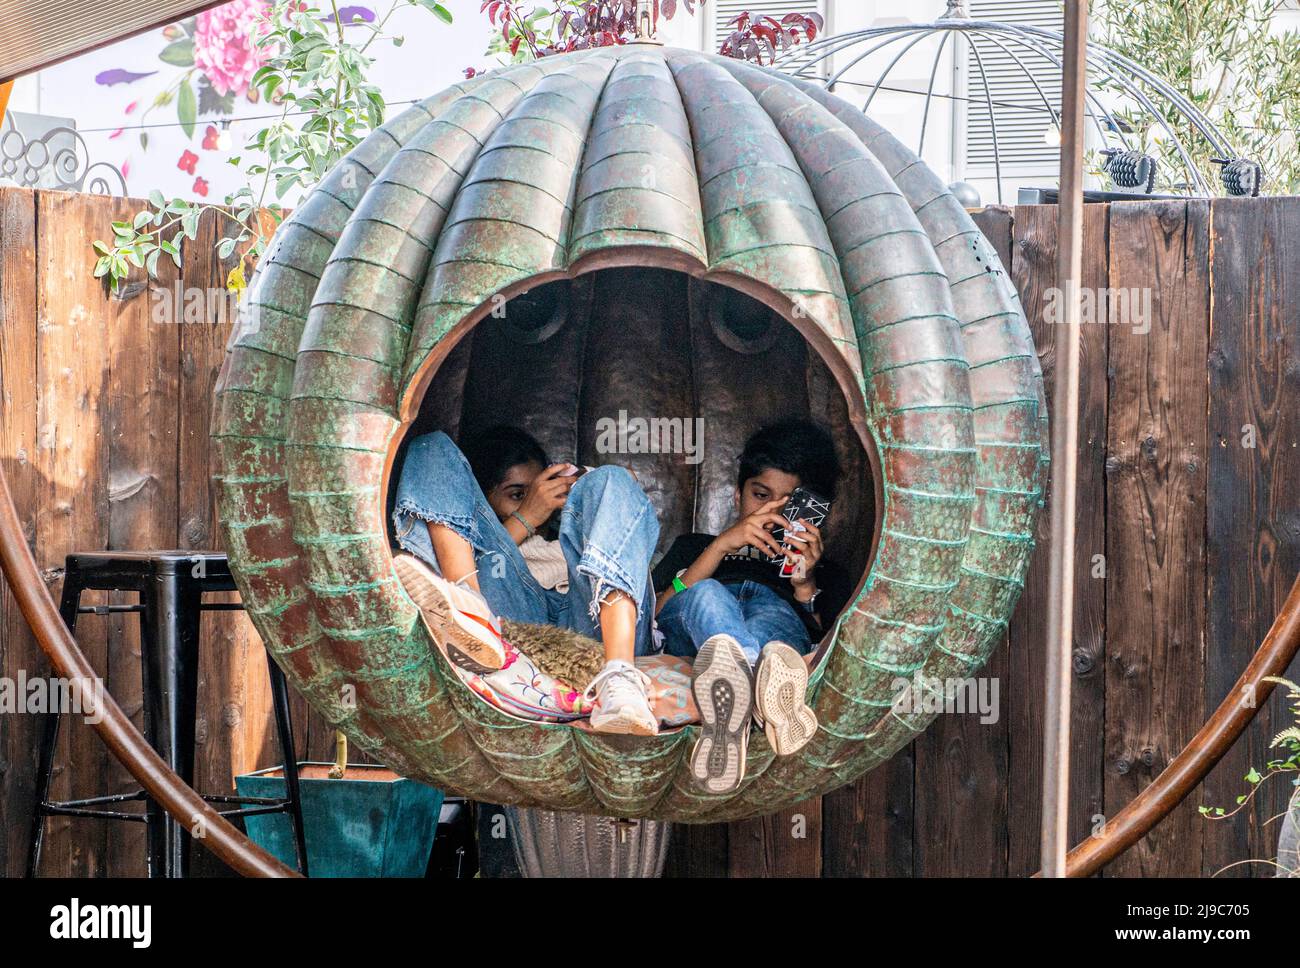 Two boys wearing trainers and jeans are concentrating on their phone while sitting in a suspended sphere on he last day of the RHS Chelsea Flower Show. Stock Photo